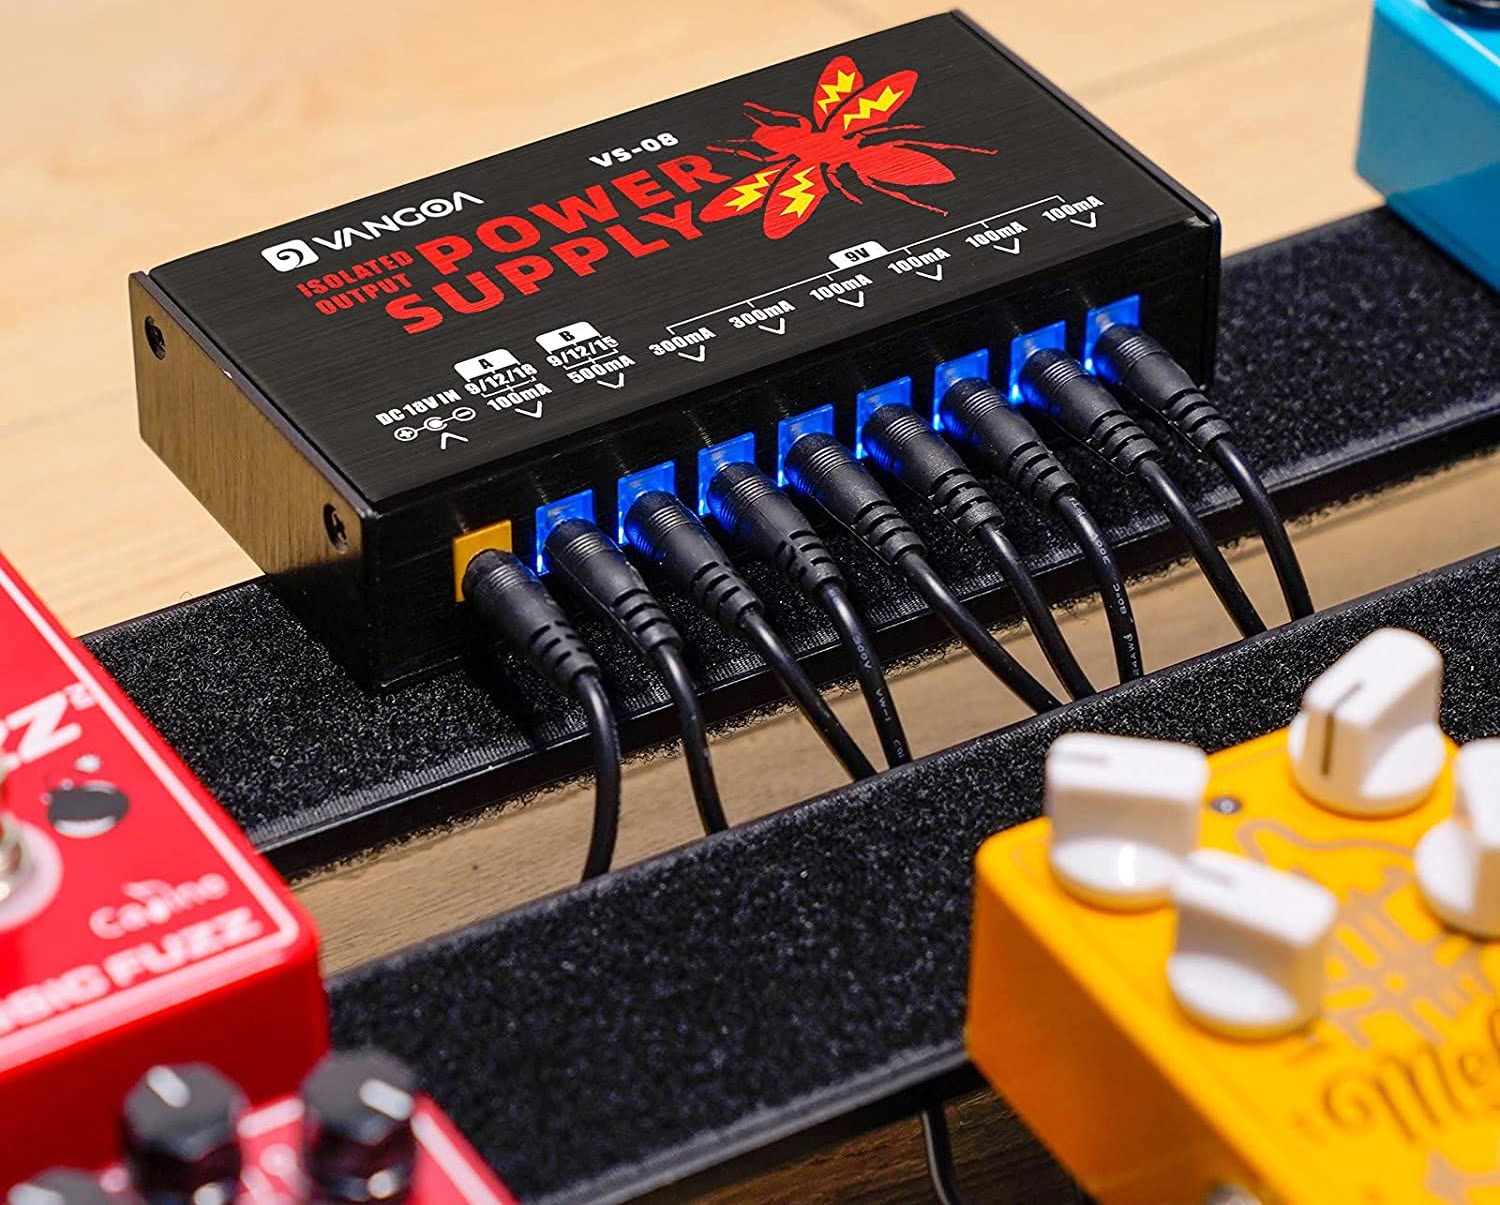 Ultimate Guitar Pedal Power Supply: A Must-Have for Him